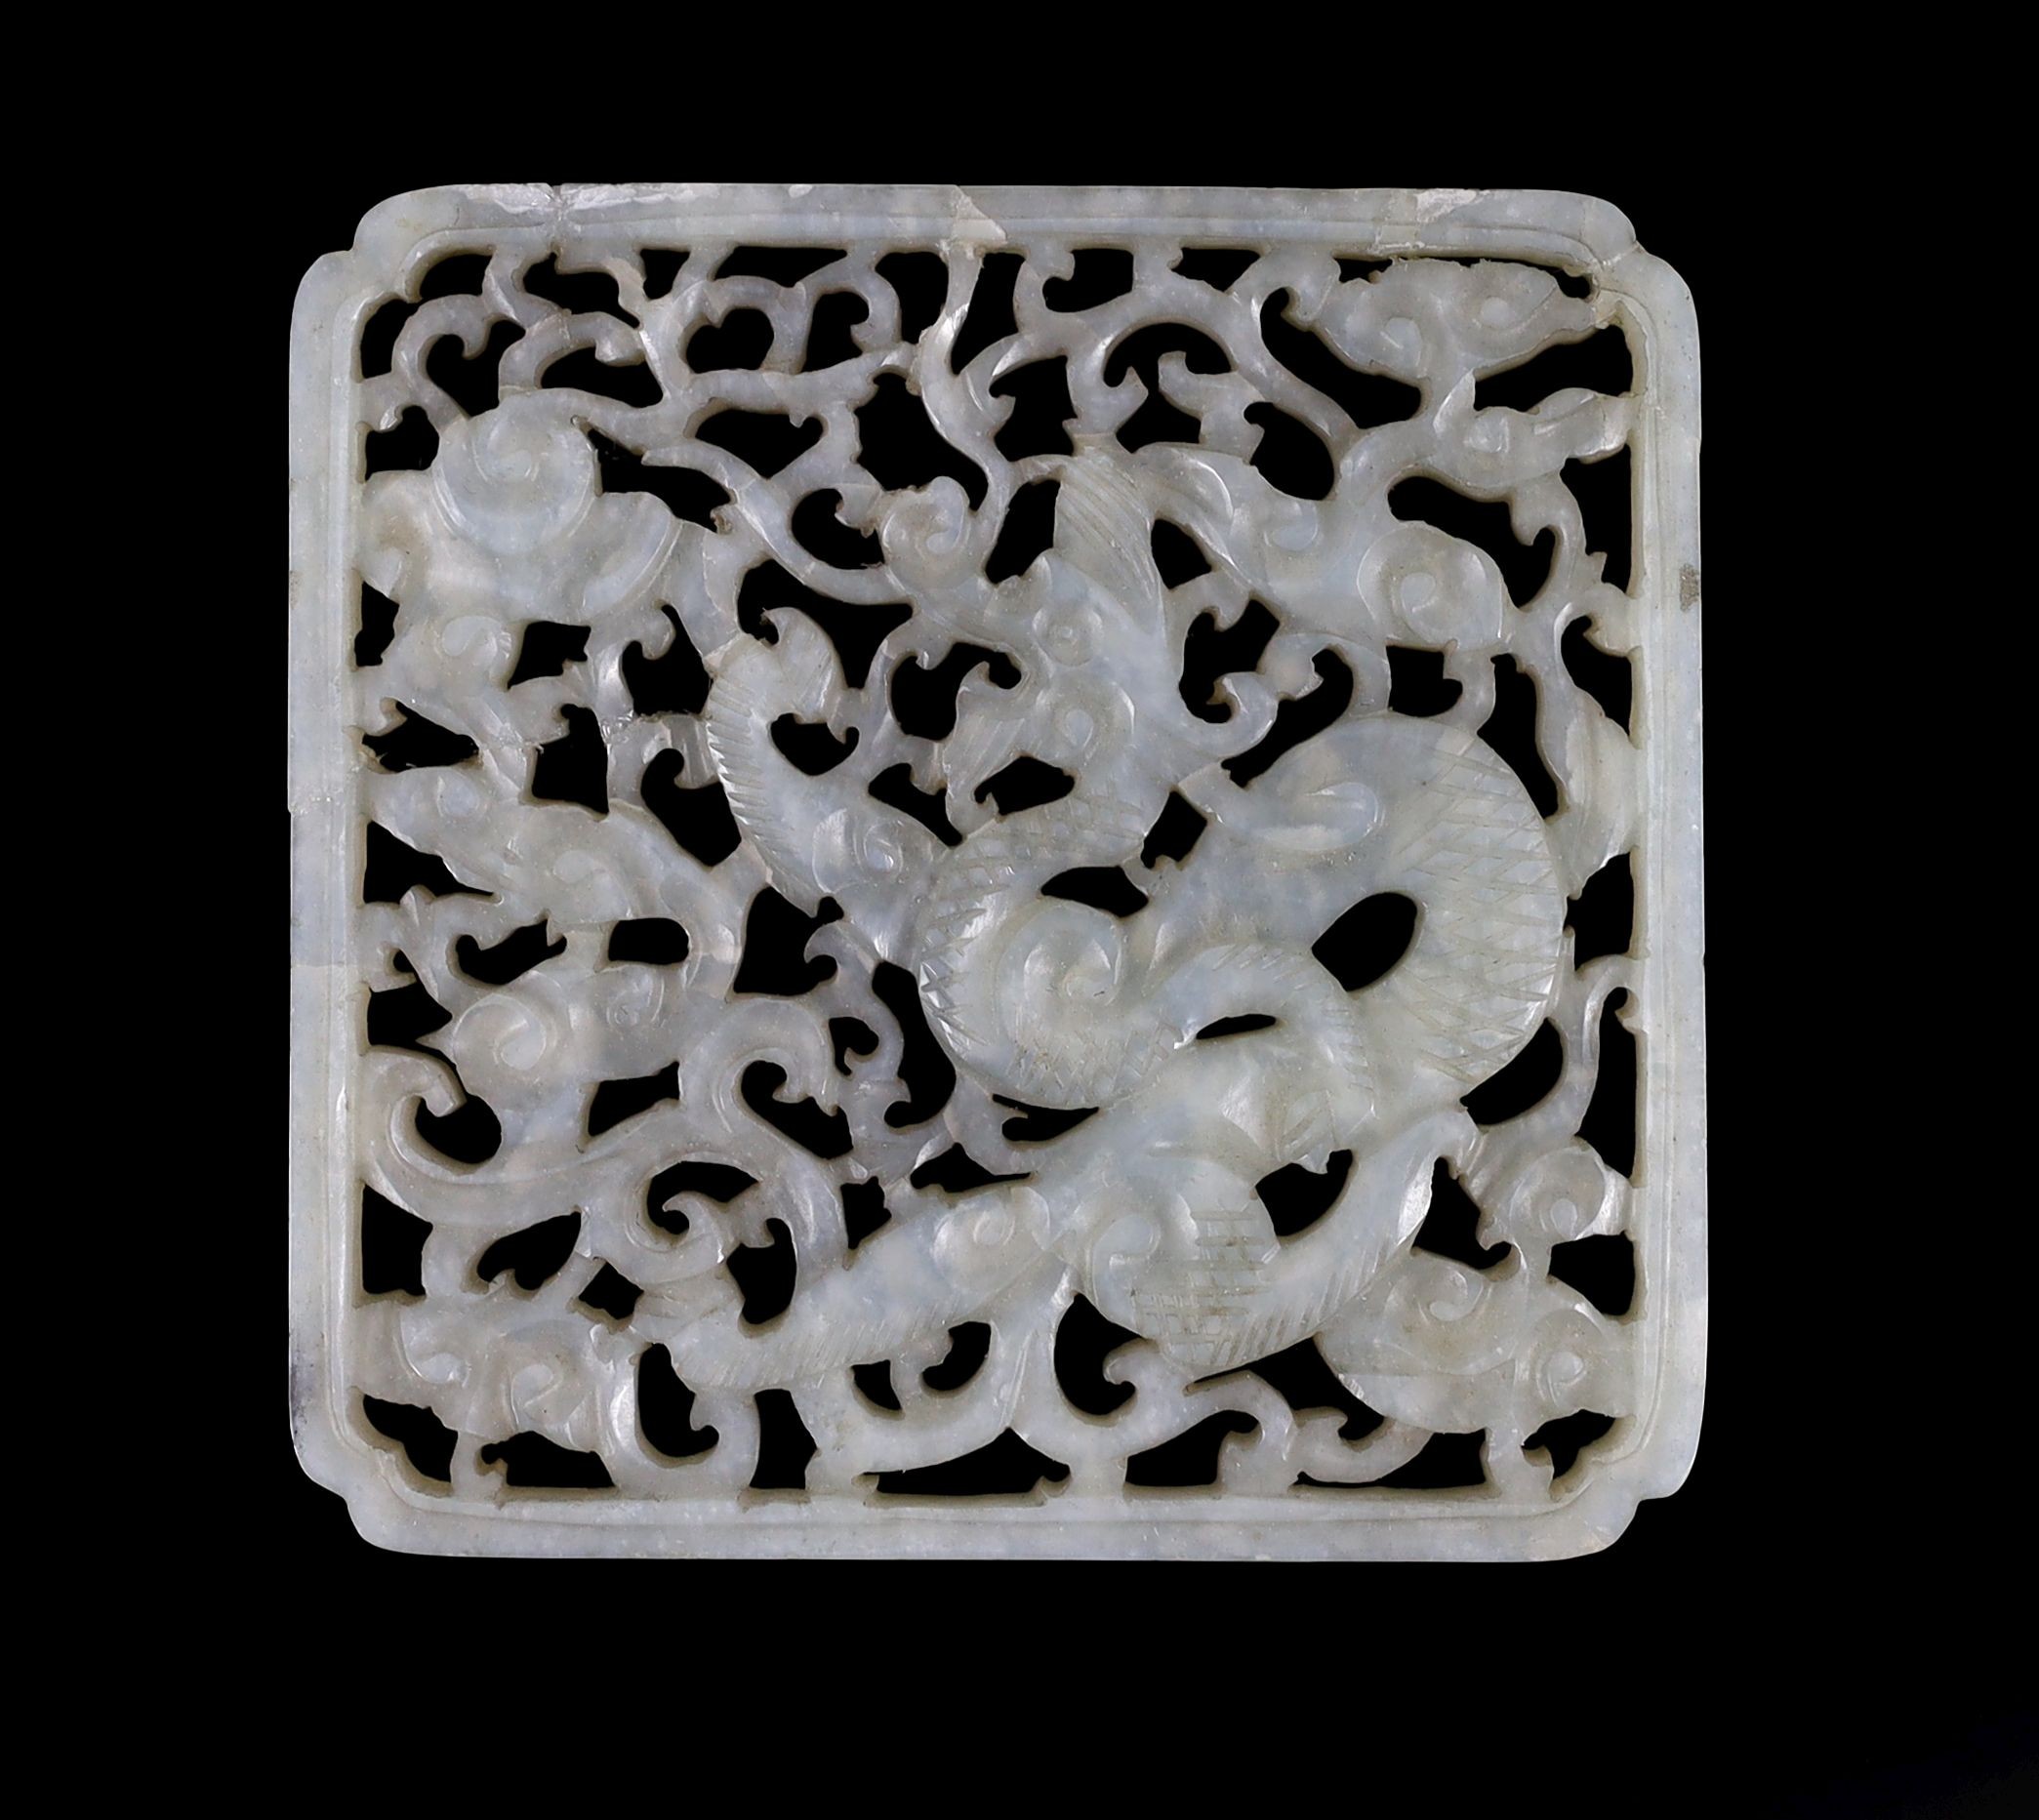 A Chinese pale celadon jade ‘Dragon’ plaque, 17th/18th century 7.5 x 7.3 cm, repaired